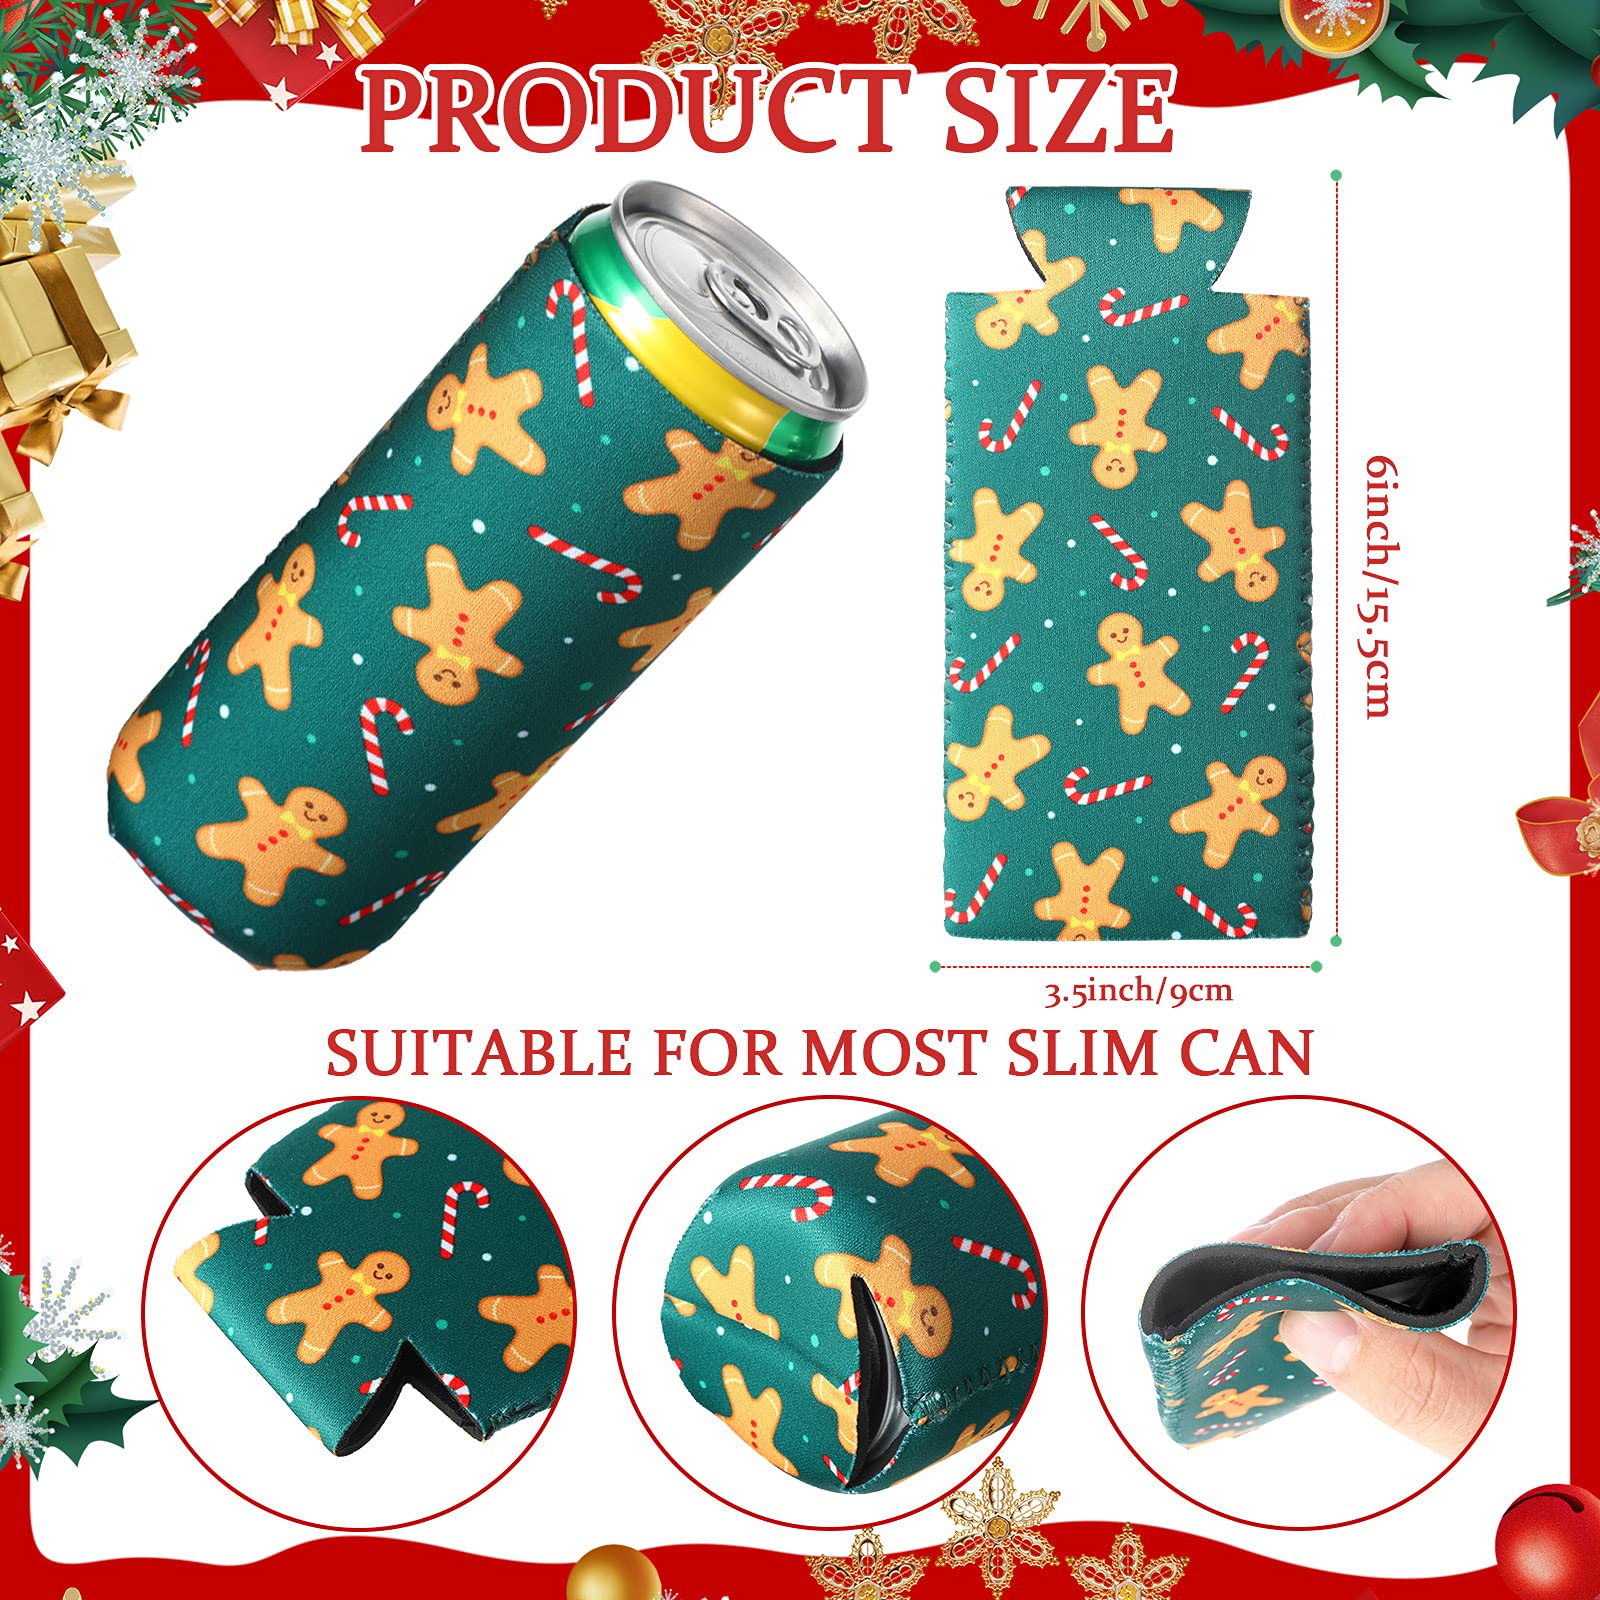 16 Pieces Christmas Beer Can Sleeves Cooling Insulated Beer Cup Sleeves Santa Claus Elk Snowman Stocking Can Cooler Sleeves Reusable Drink Sleeves Christmas Slim Can Cover for Christmas Tools Supplies